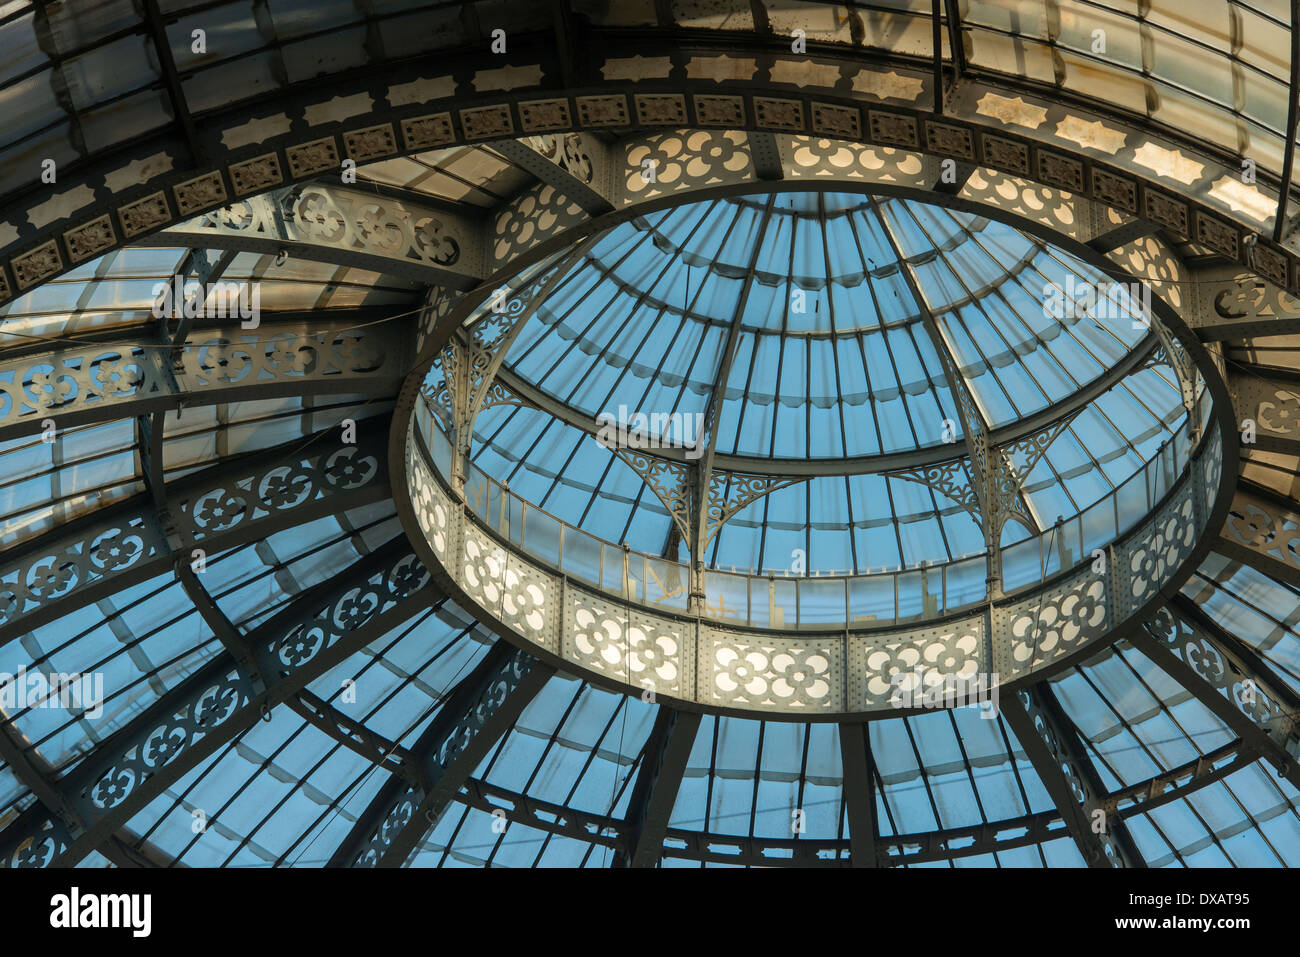 detail of dome of iron and glass roof at famous arcade in city center, shot in bright light Stock Photo